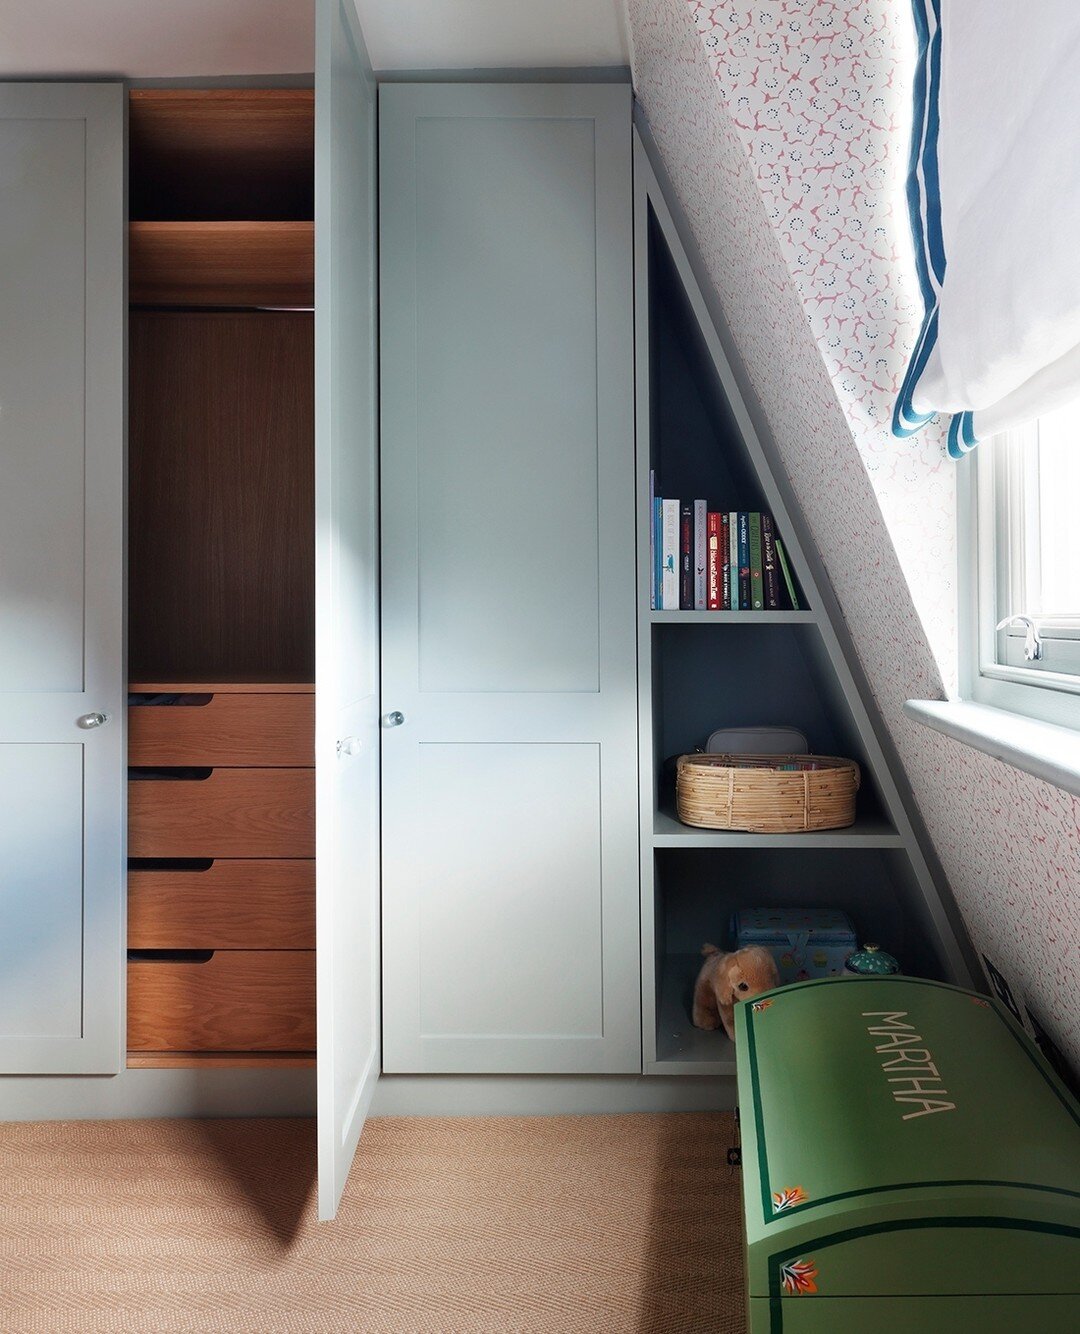 Good storage is so important in a bedroom.  This custom wardrobe and shelving filled an awkward nook (in the same bedroom we posted yesterday!) and created the perfect place to hide clothes, store precious belongings and display favourite books.  The